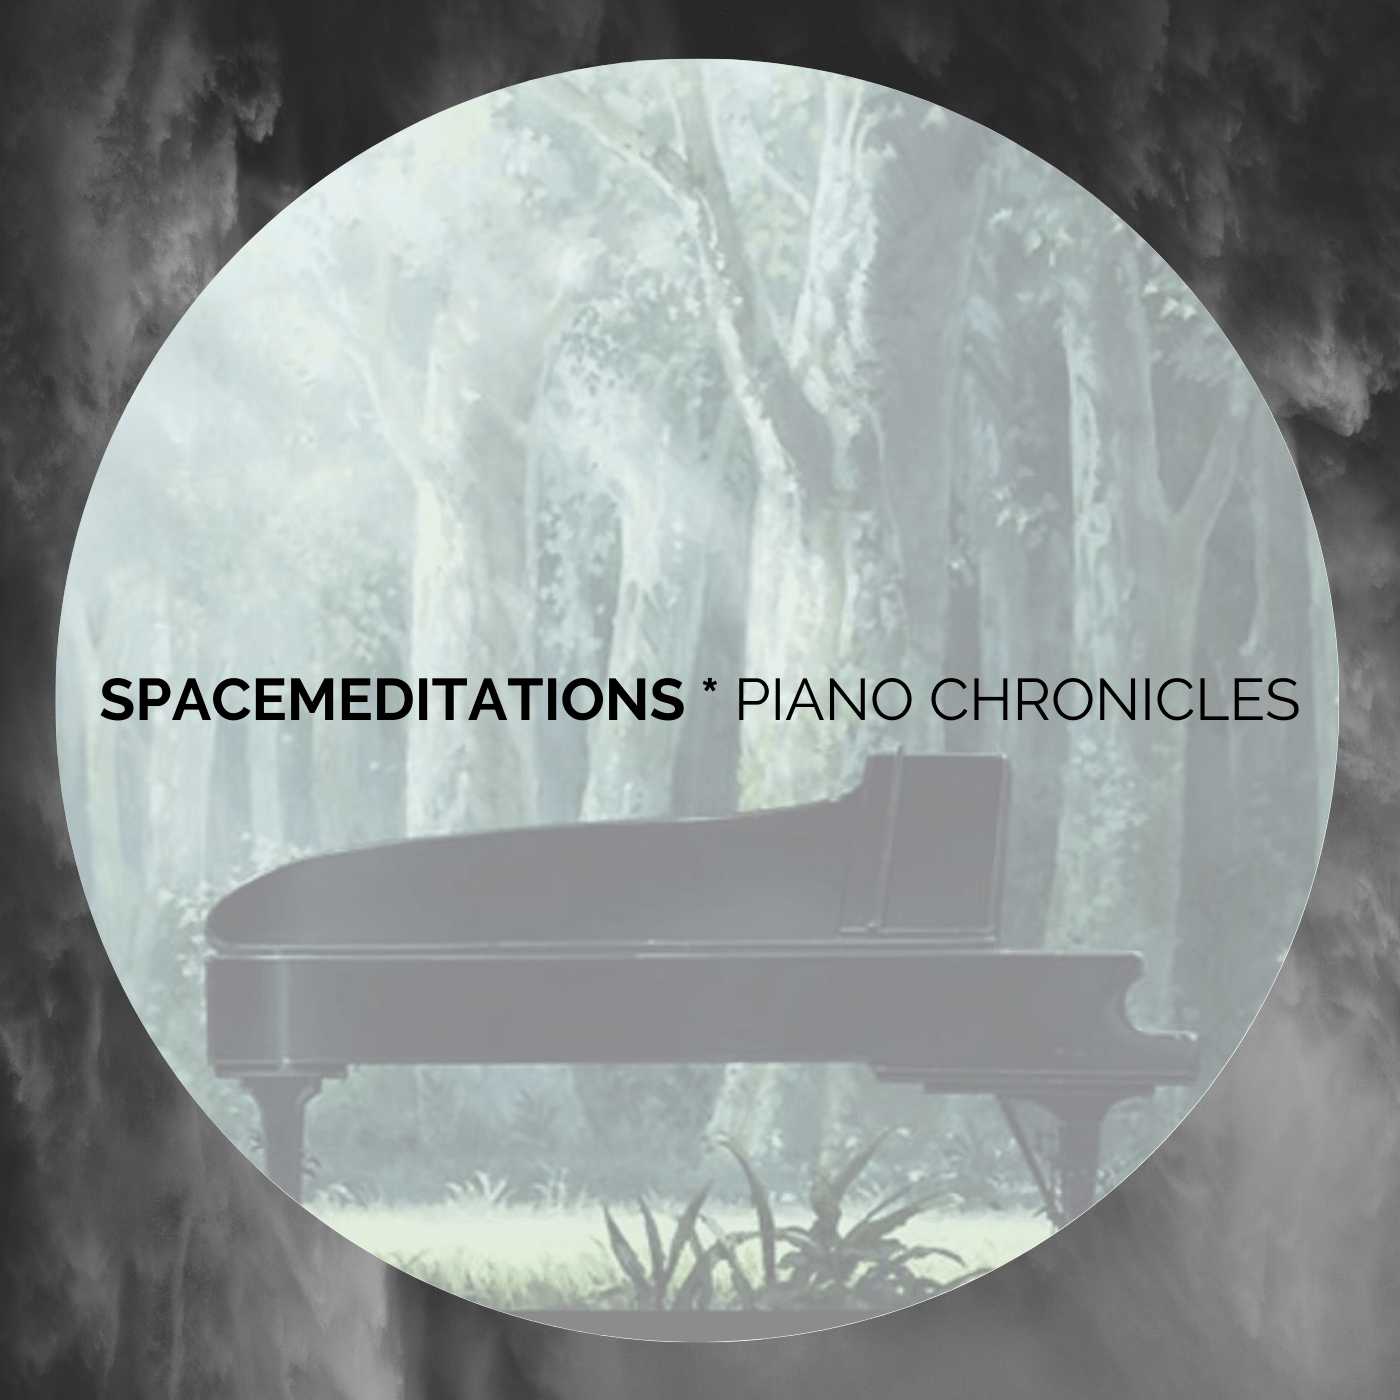 Piano Chronicles. Spacemeditations